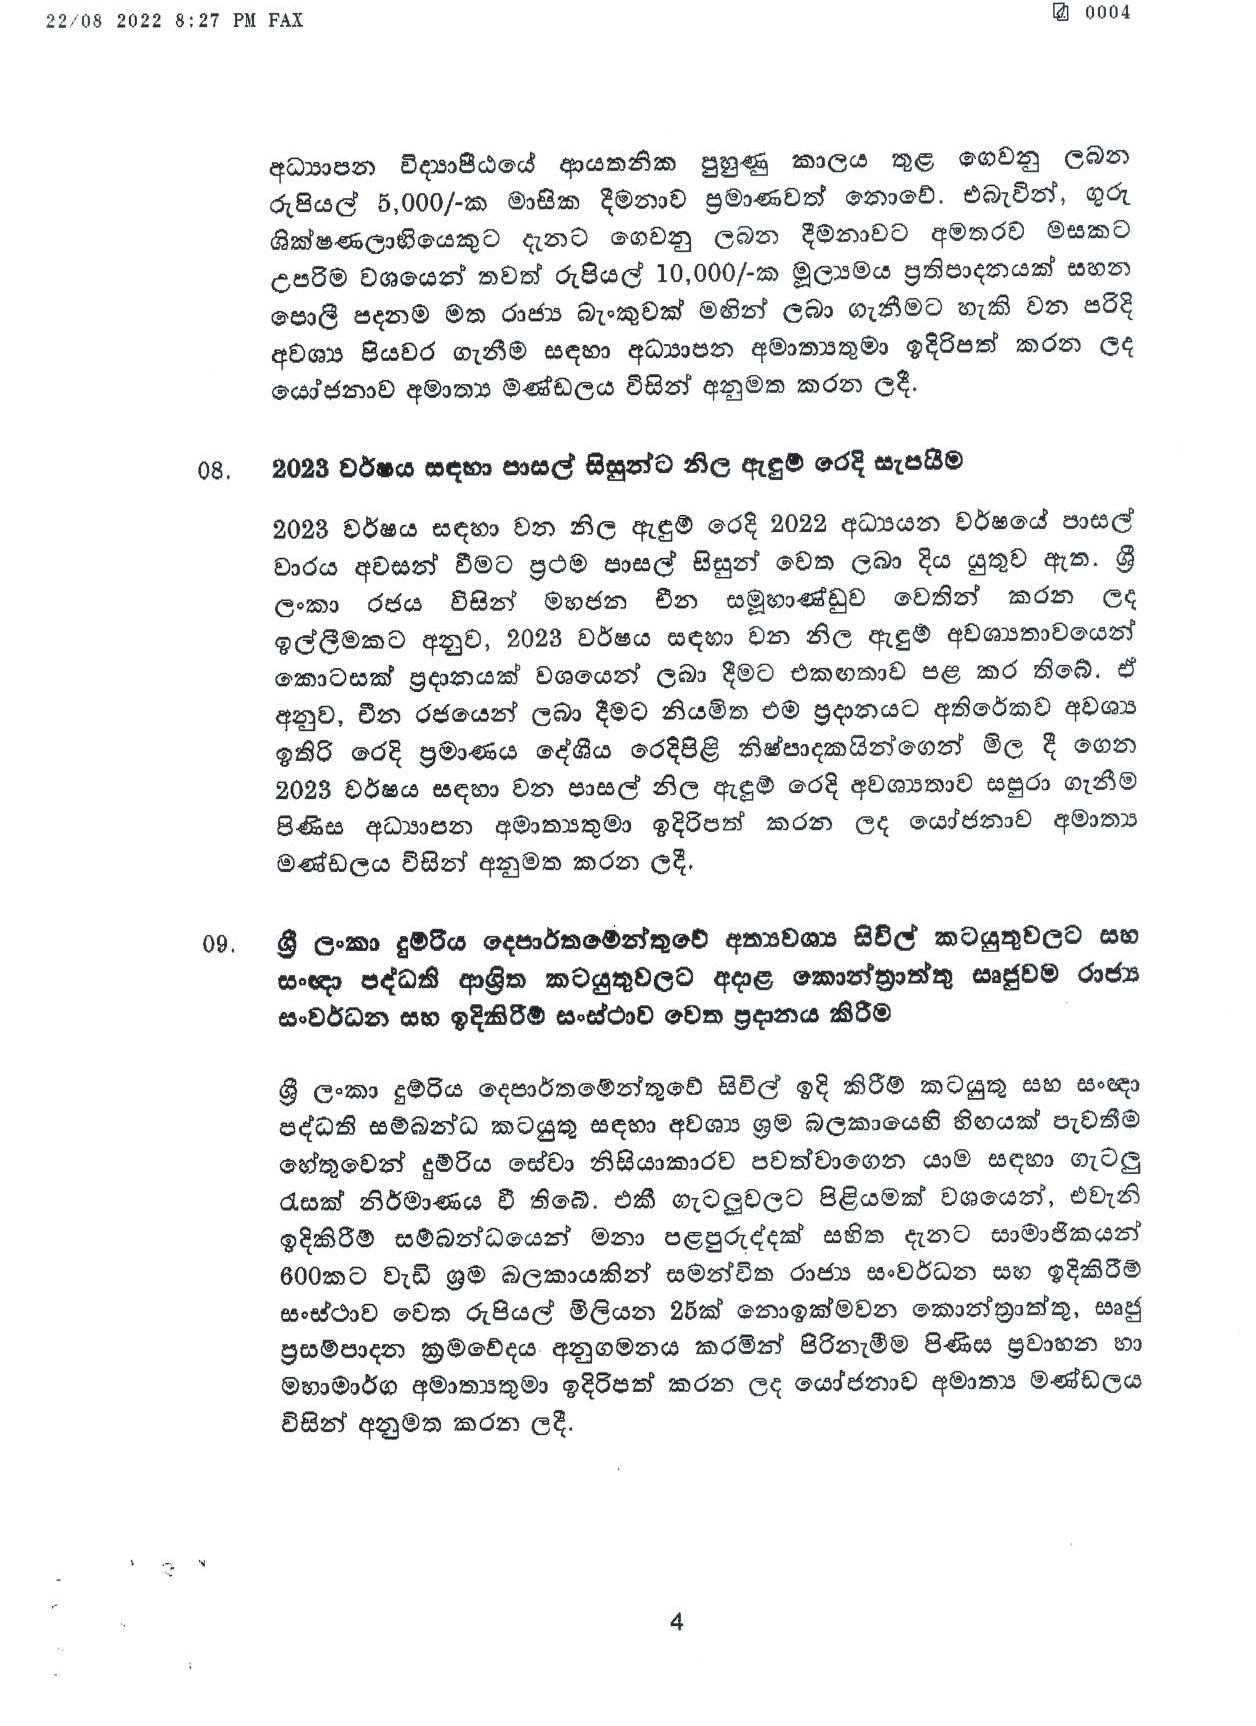 Cabinet decision on 22.08.2022 page 004